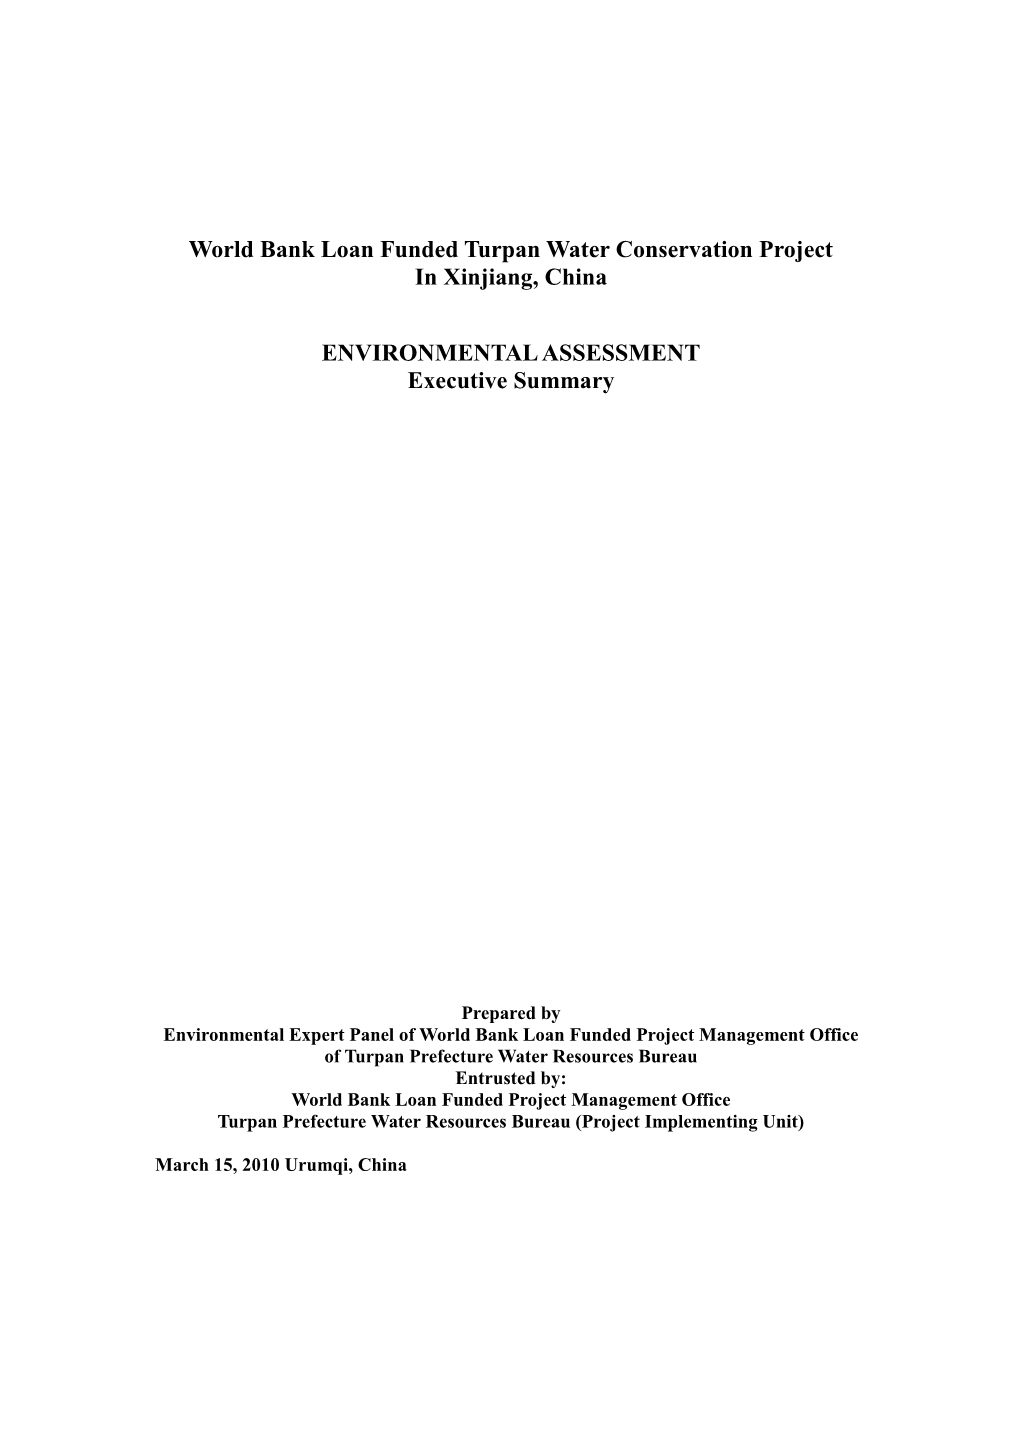 World Bank Loan Funded Turpan Water Conservation Project